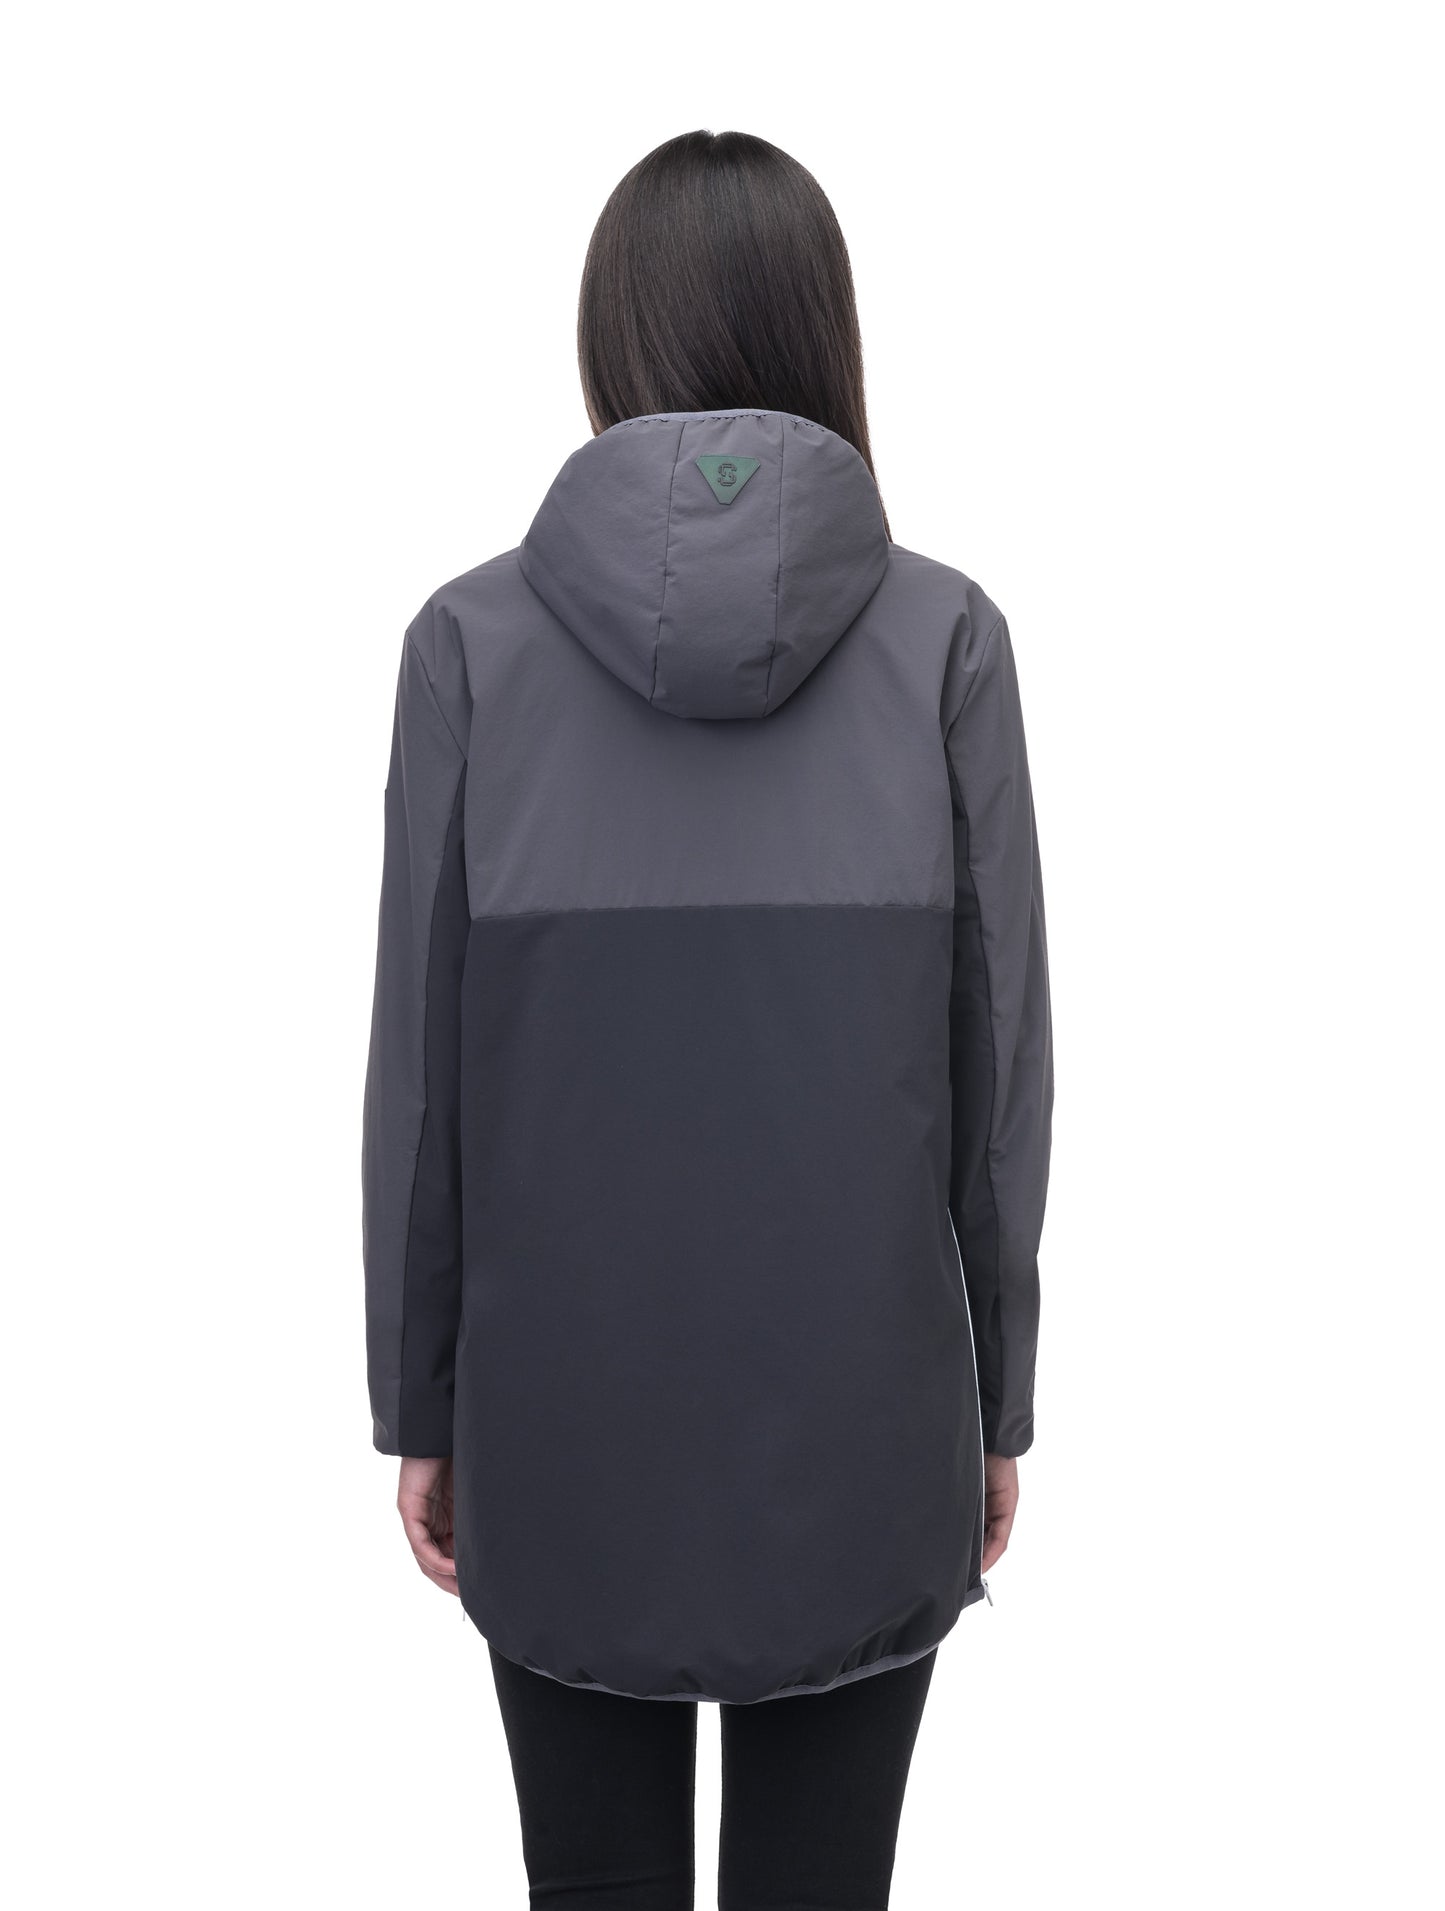 Unisex thigh length hooded anorak with vertical zipper along collar, side zippers along torso, and centre zipper pouch with a reflective flap, in Steel Grey/Black